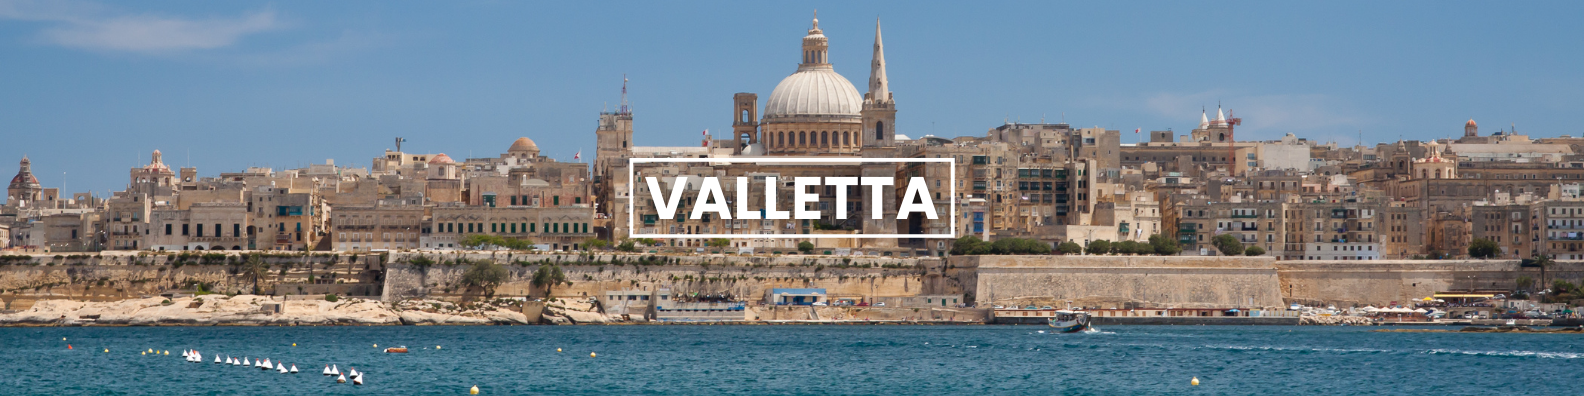 a picture of a city with the word valletta on it .